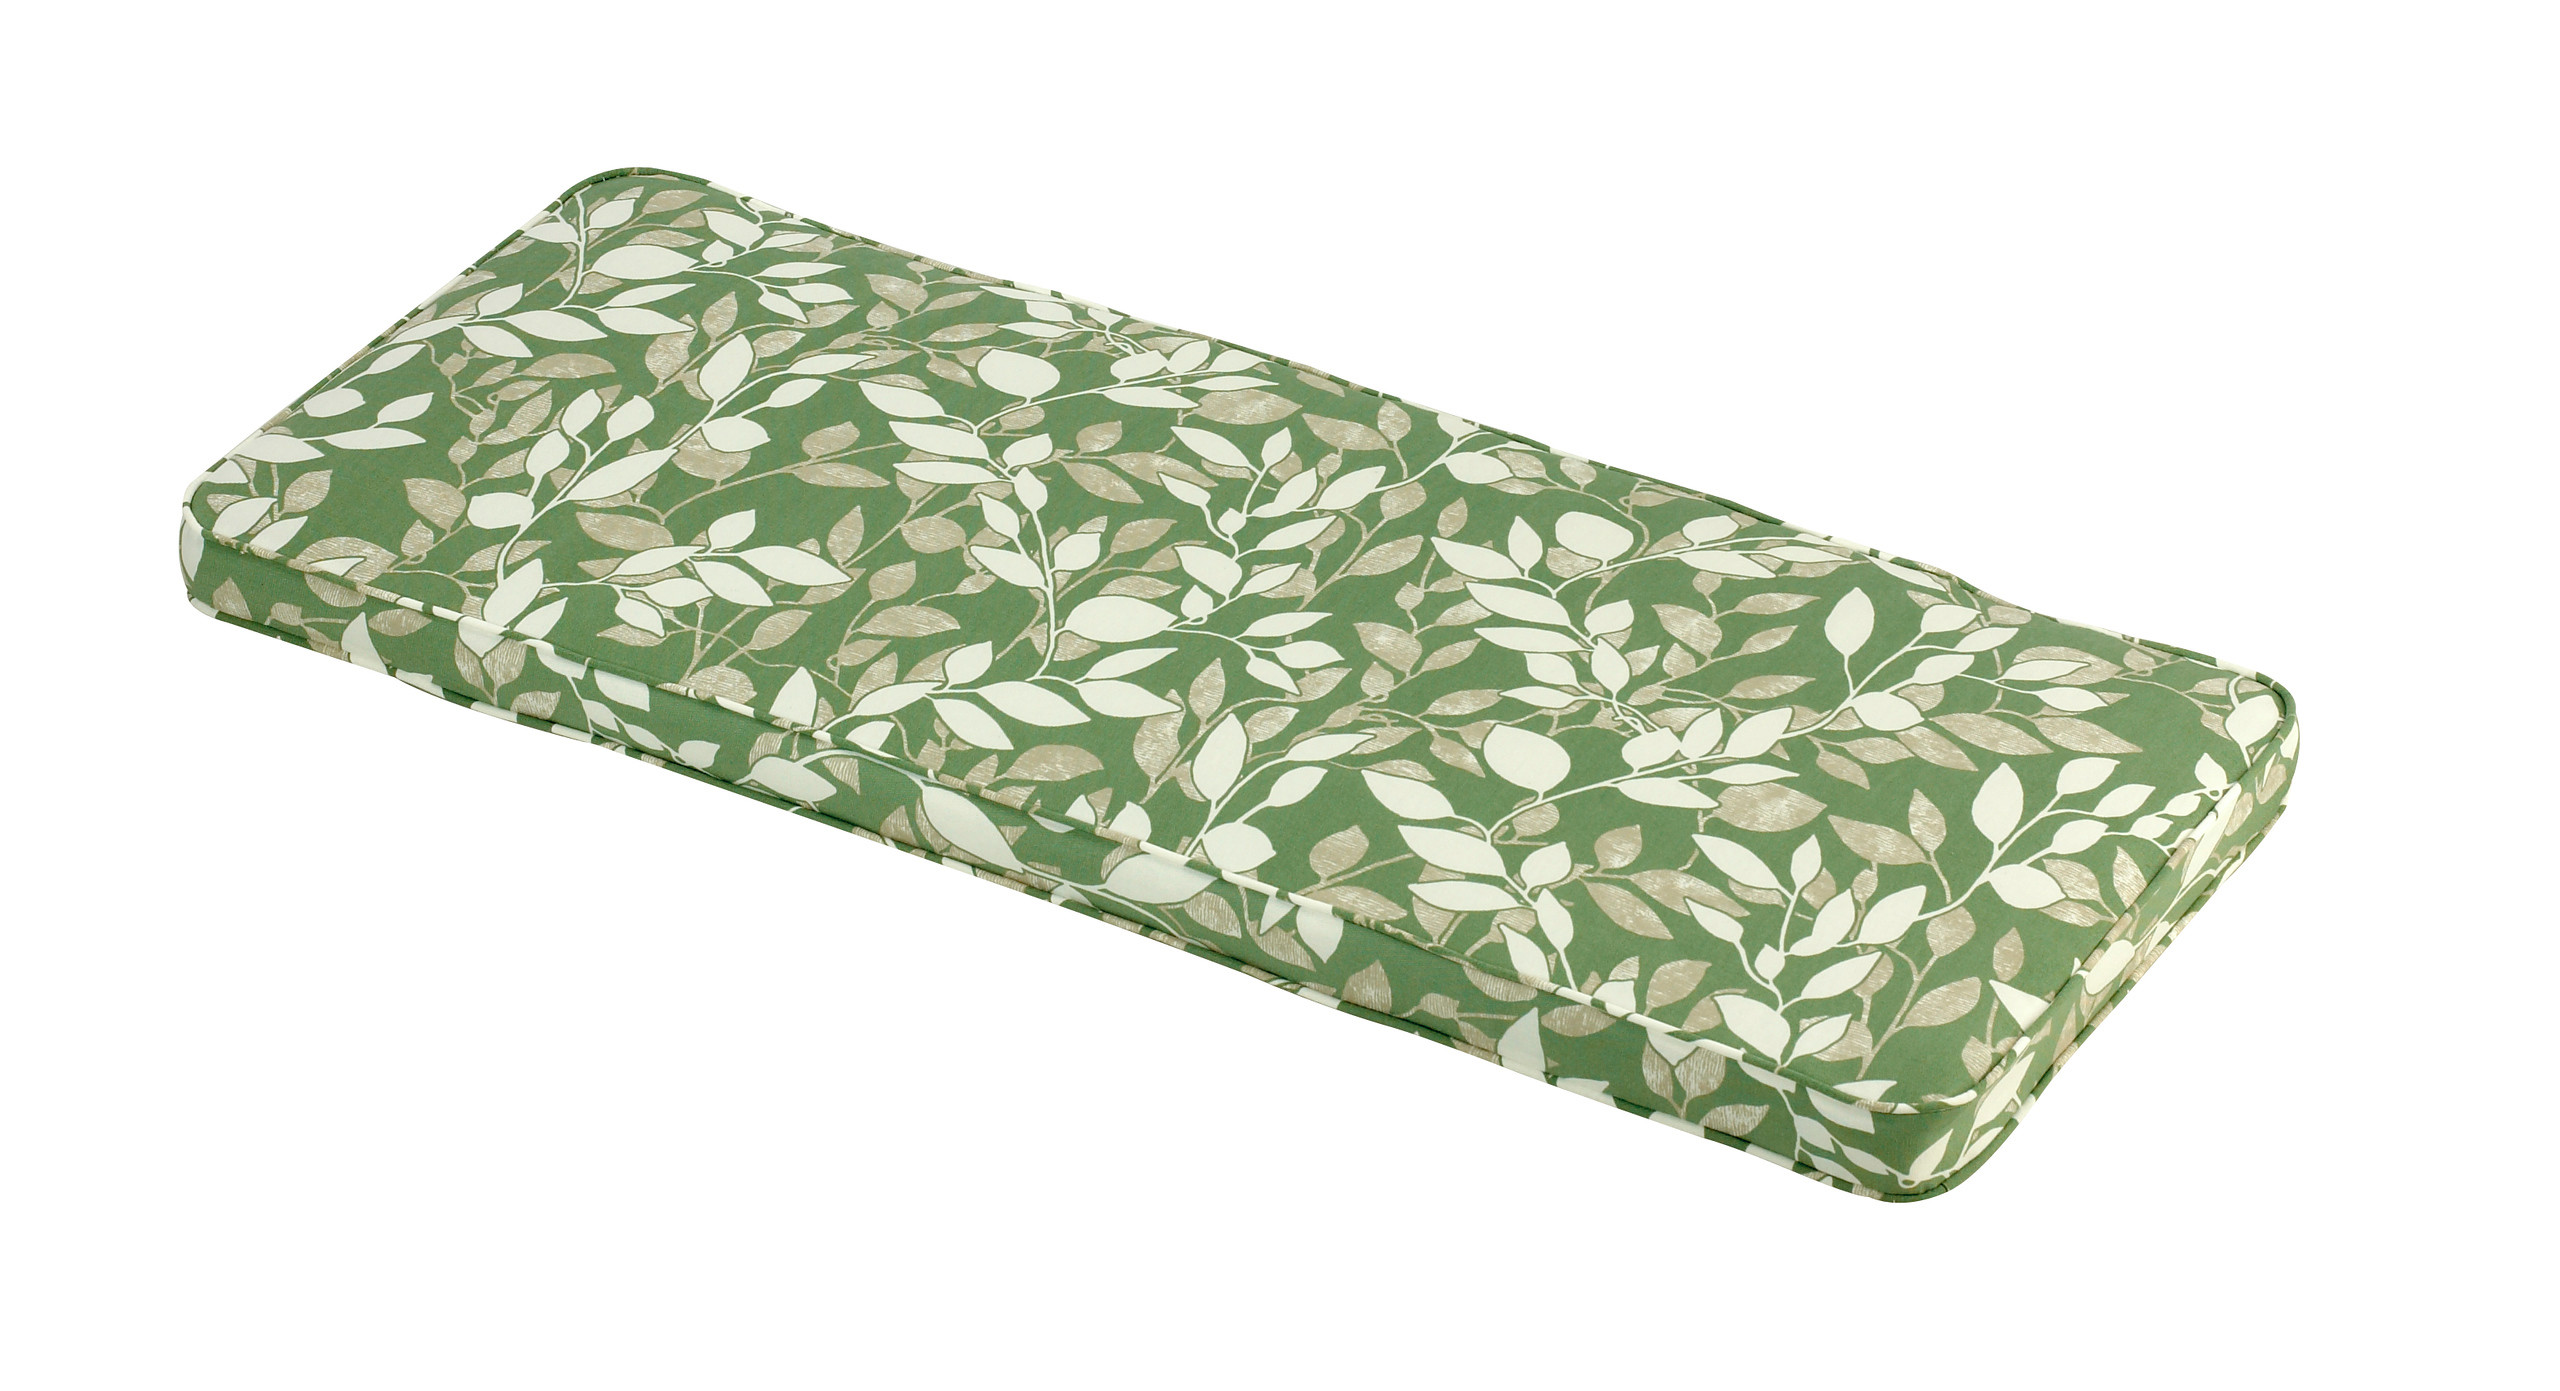 Glendale Cotswold Leaf 3 Seater Bench Cushion